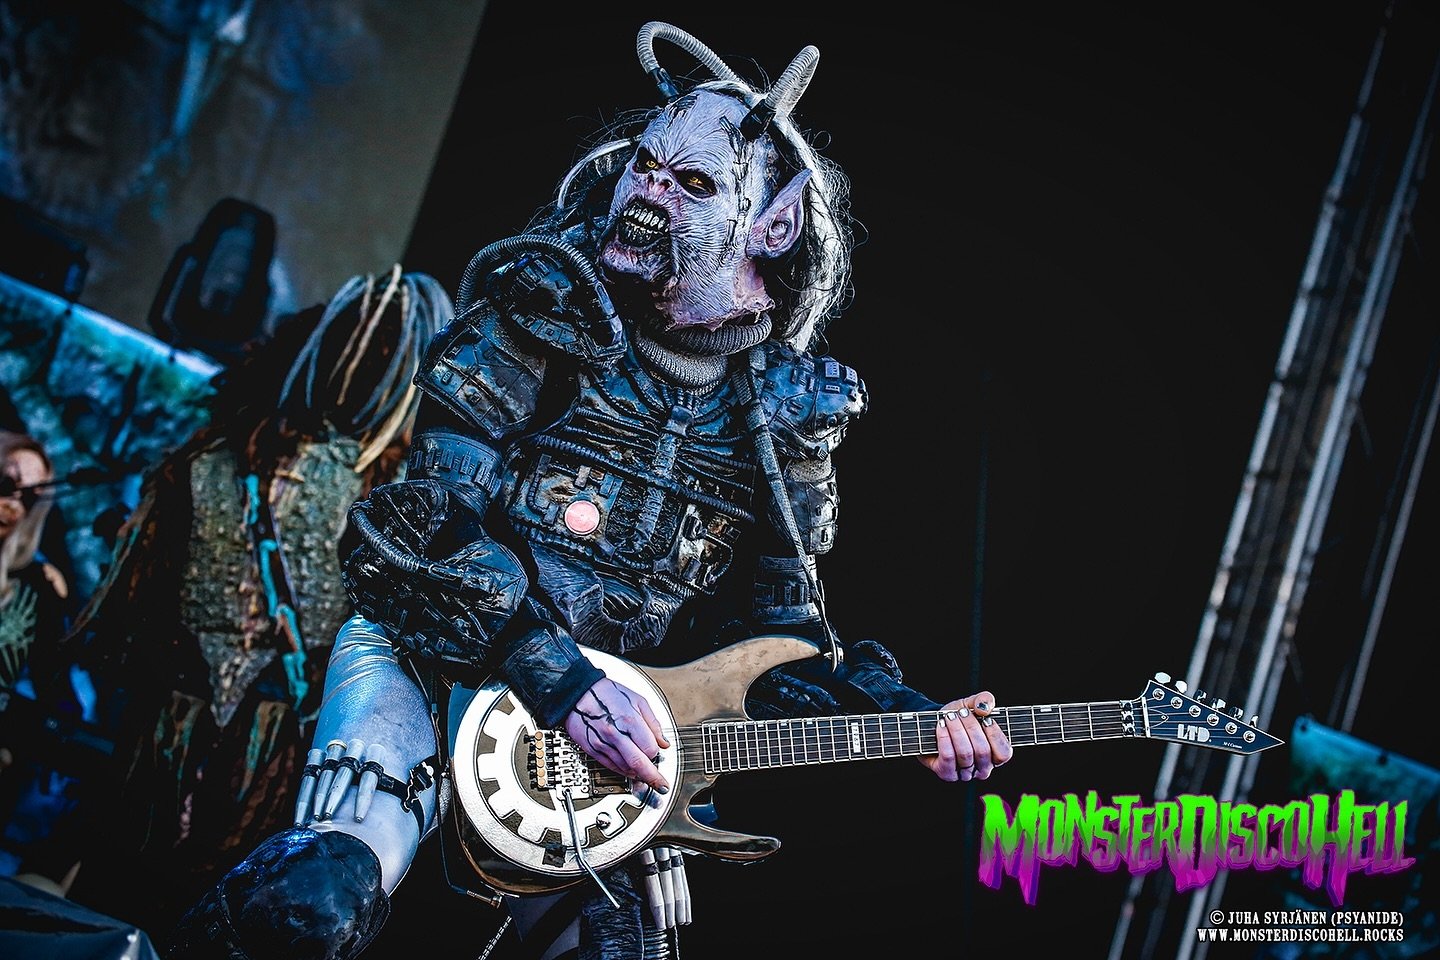 It&rsquo;s Wednesday so it&rsquo;s time for our mid-week mechanical machine monster madness and who&rsquo;s our resident mad mechanical machine monsterman? Spoiler alert! It&rsquo;s Kone! Here&rsquo;s a previously unused action shot, taken at Rockfes